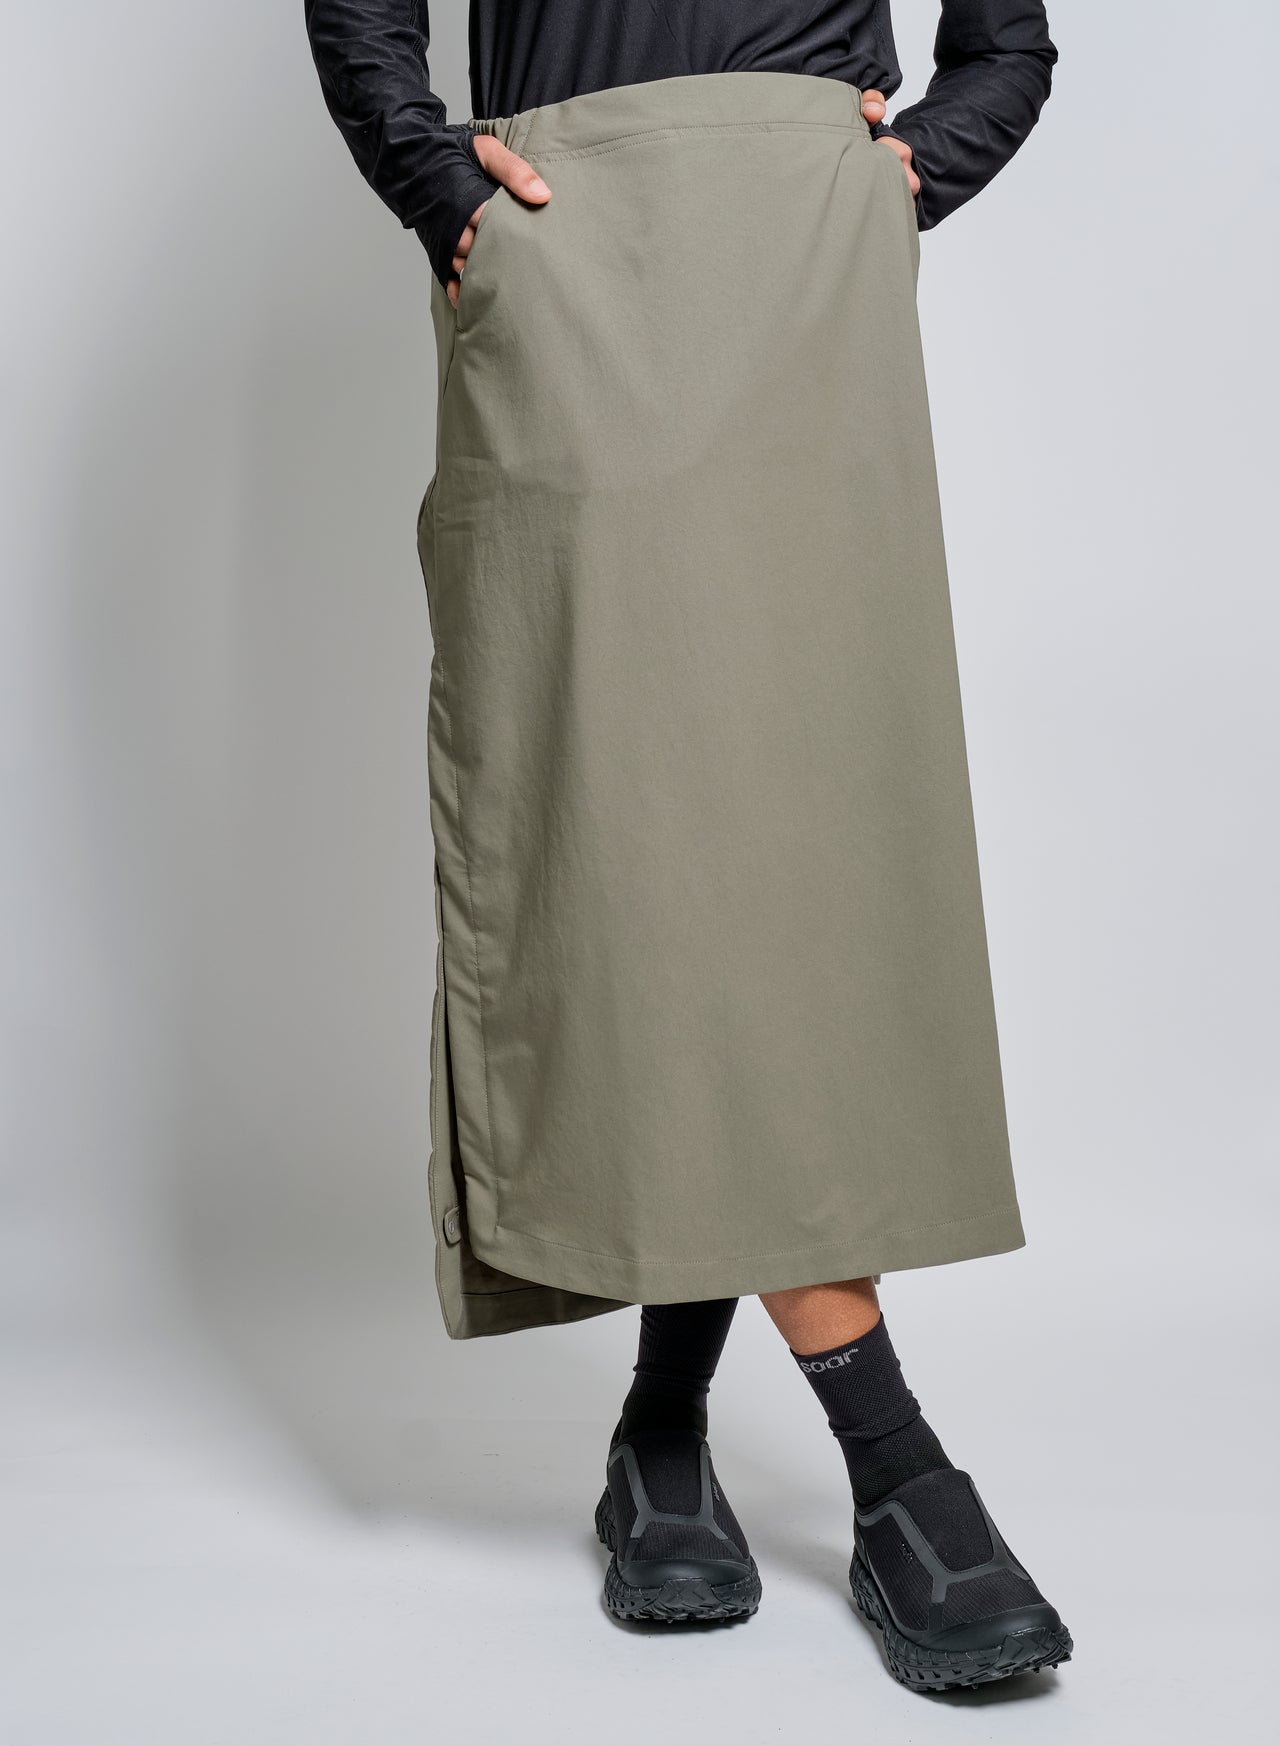 W's Walkabout Skirt in Sage Green